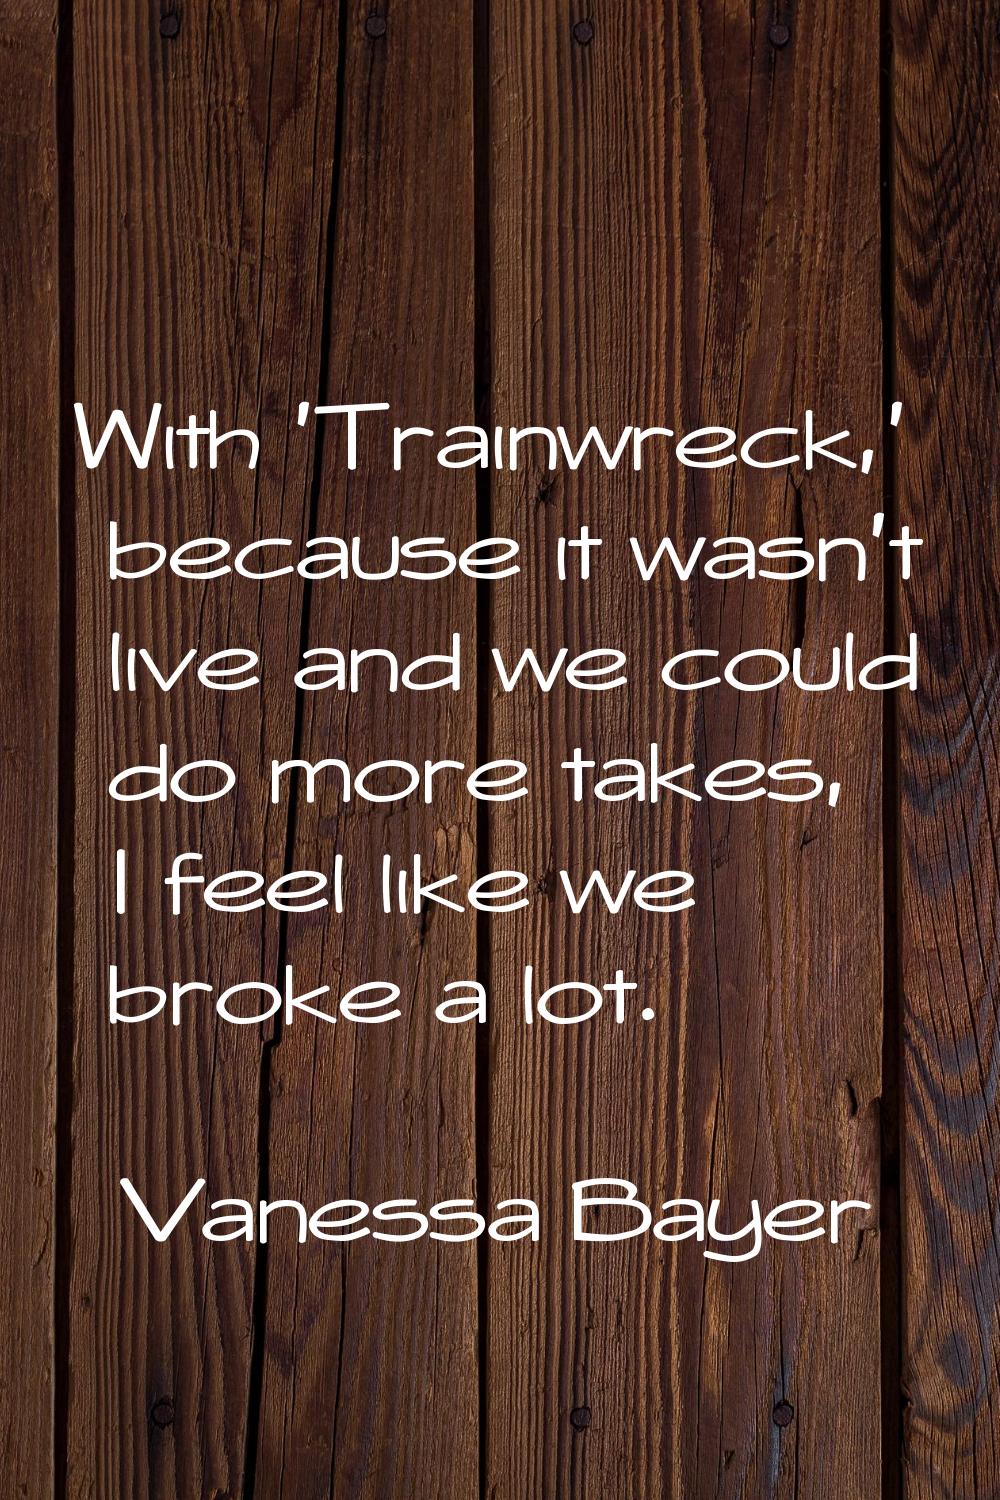 With 'Trainwreck,' because it wasn't live and we could do more takes, I feel like we broke a lot.